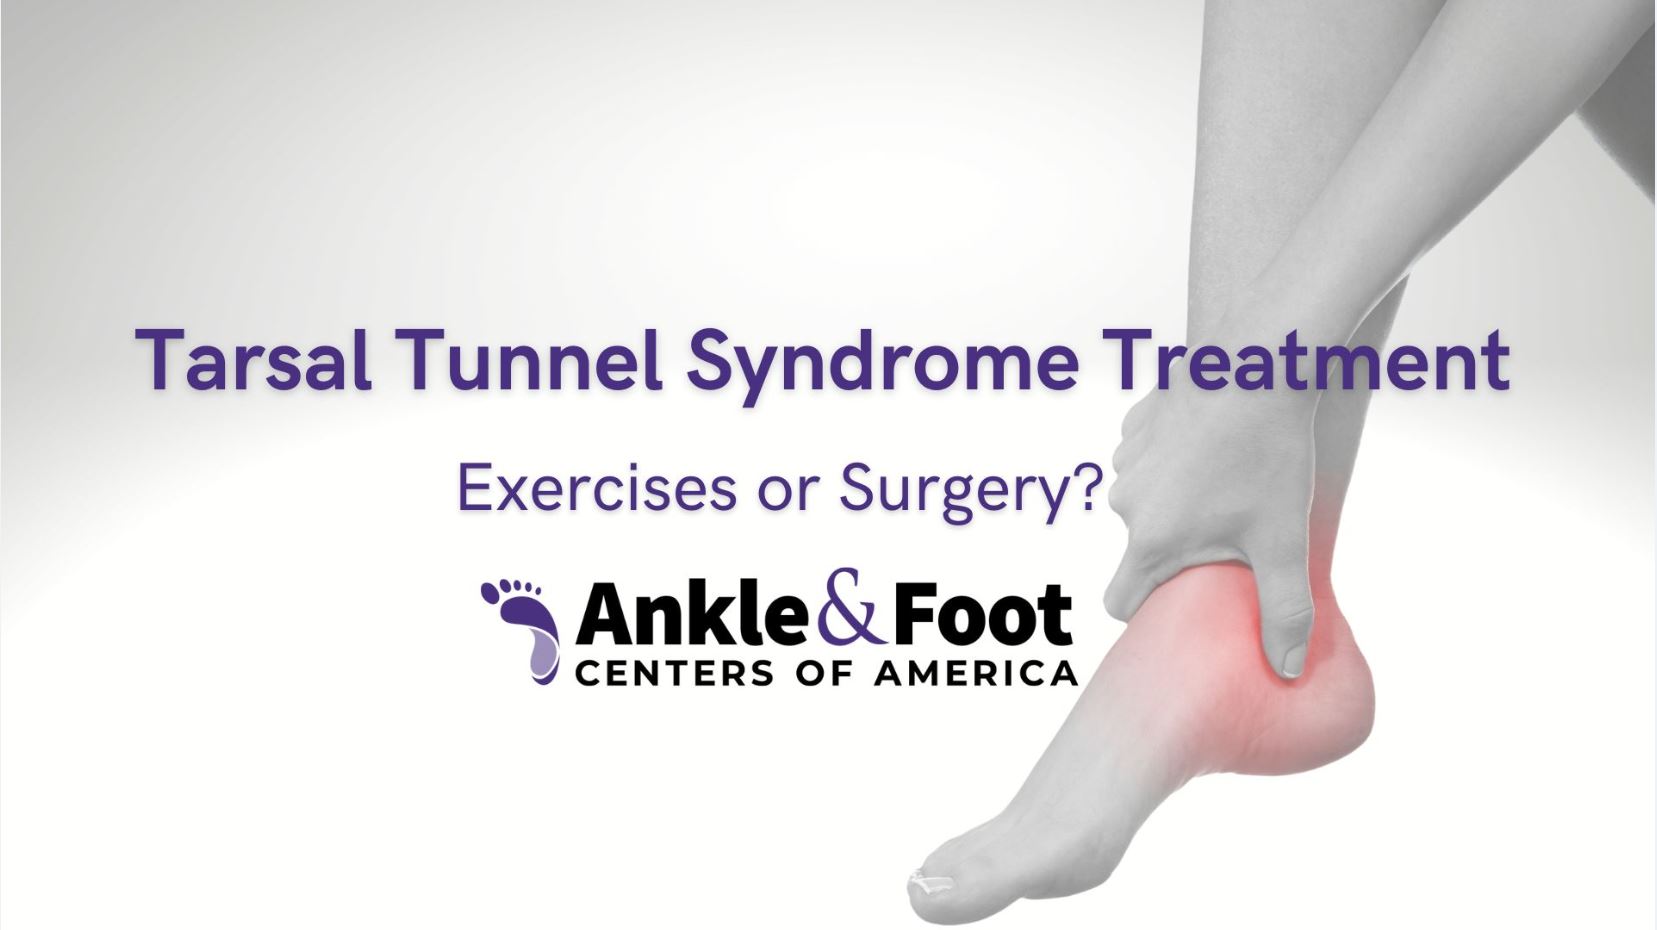 Tarsal Tunnel Syndrome Treatment – Exercises or Surgery?